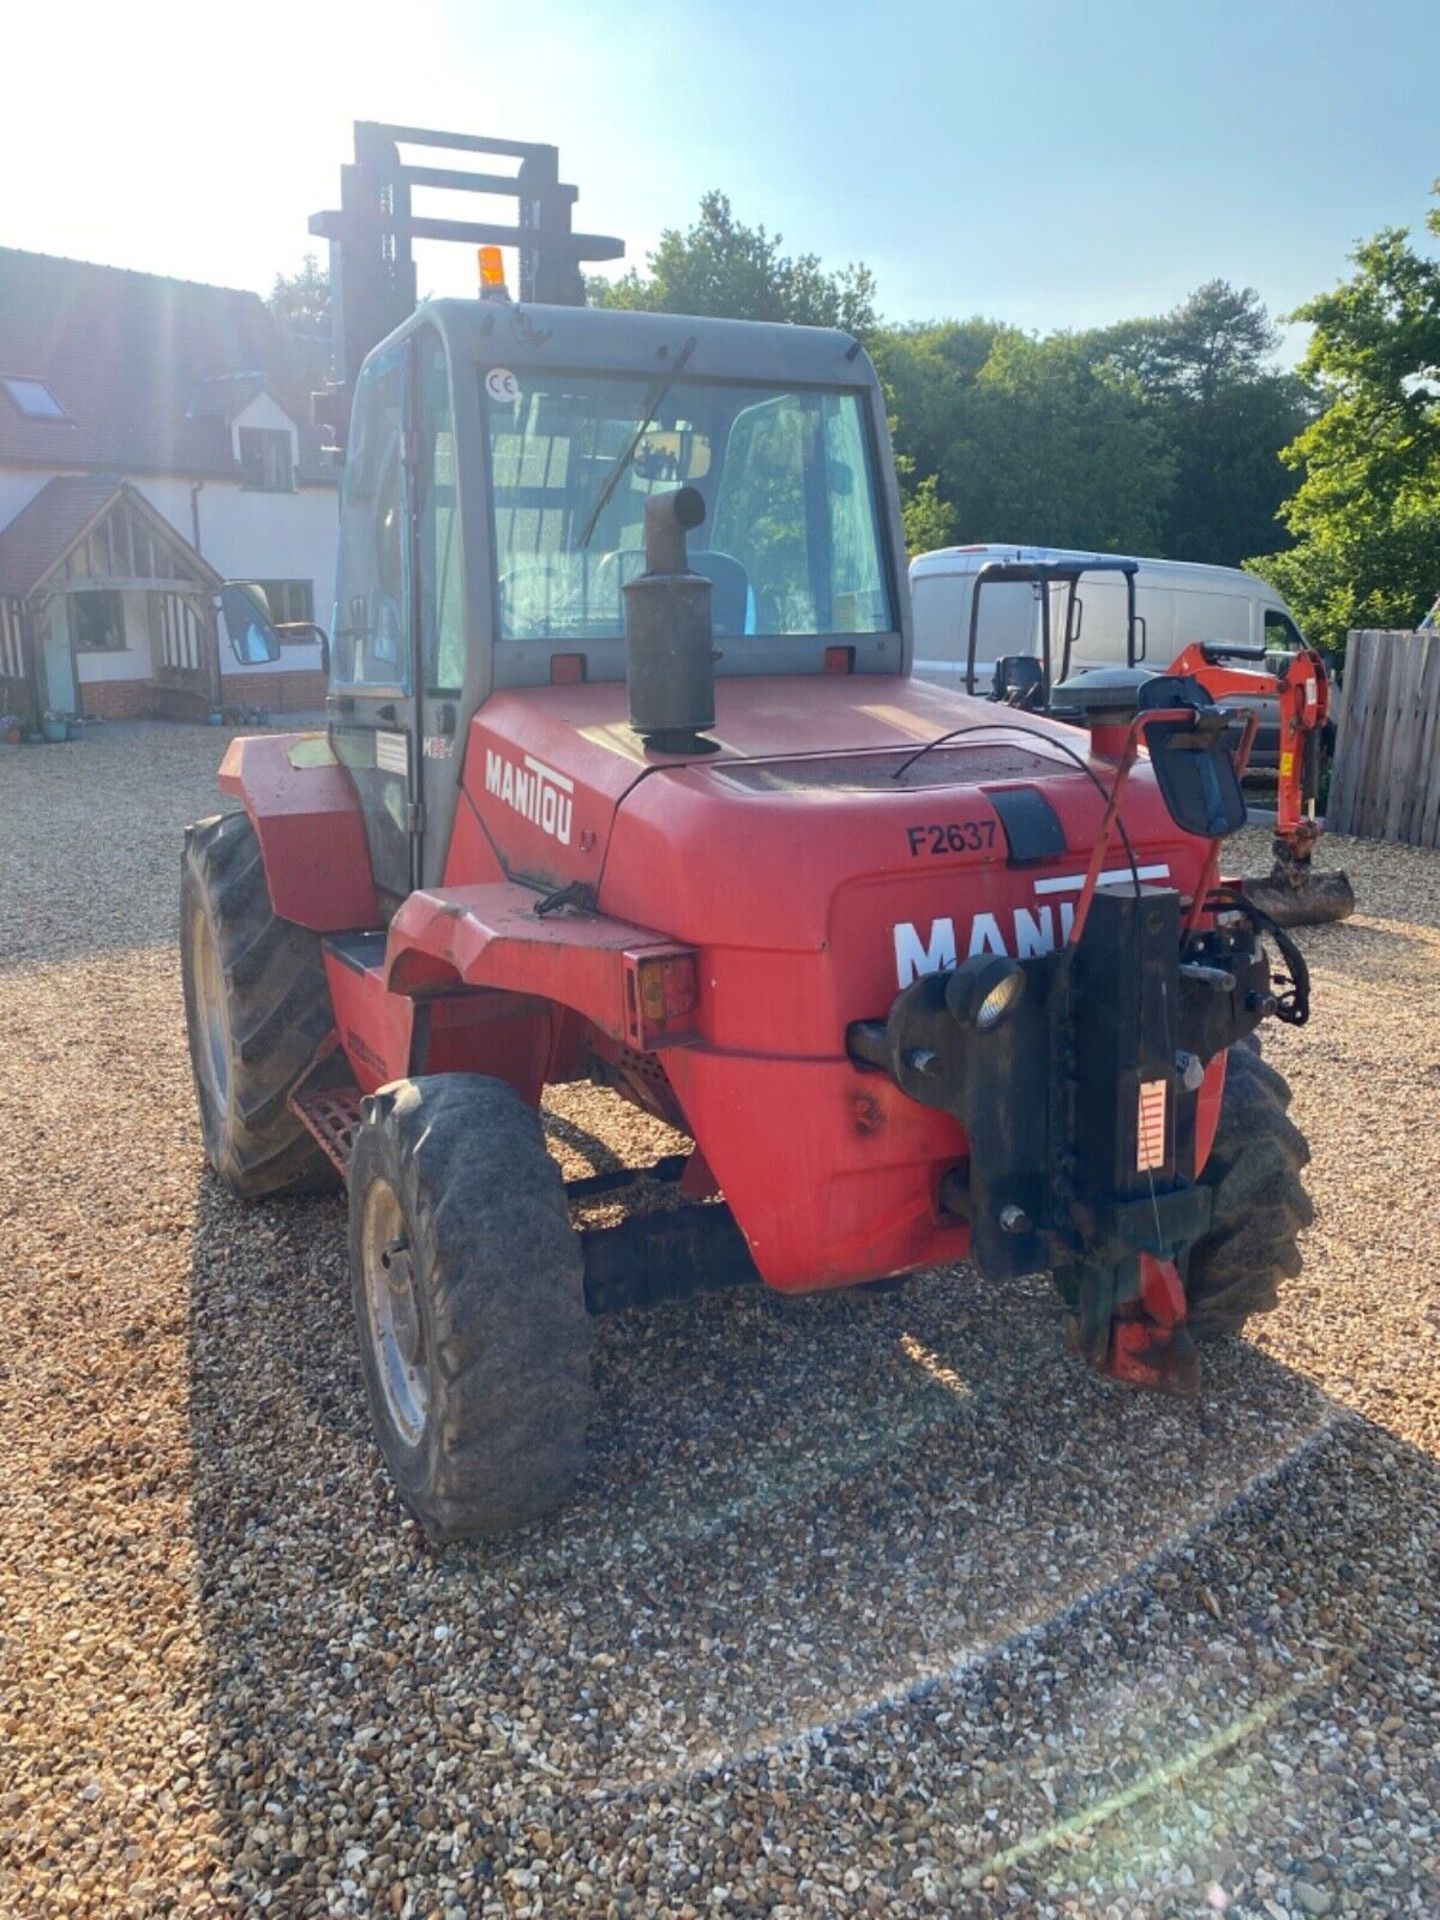 2010 MANITOU M26-4: ROBUST, WELL-MAINTAINED FORKLIFT - Image 10 of 12